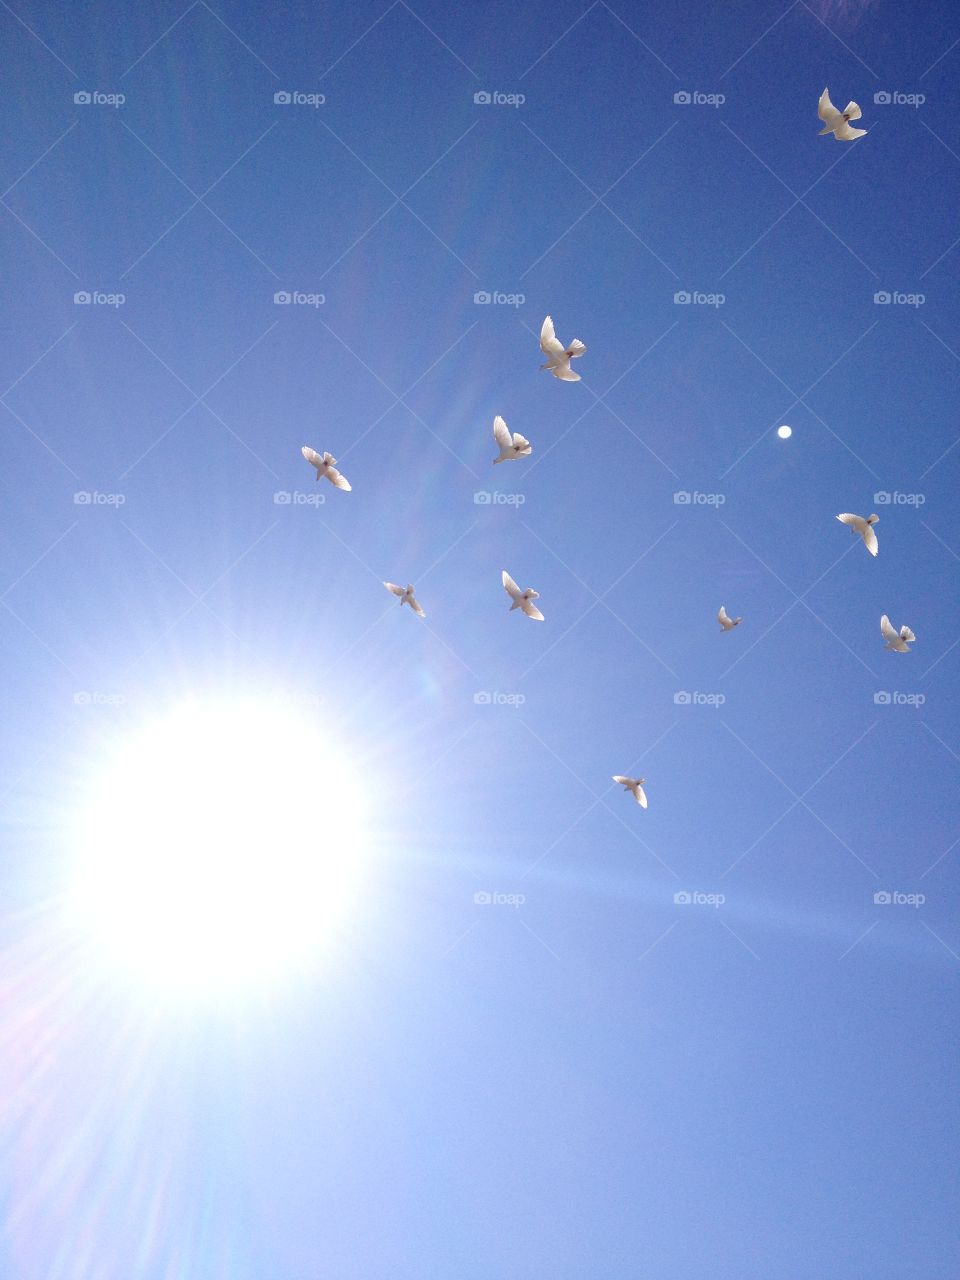 MAGICAL MOMENT. Beautiful White Doves Flying Toward The Light